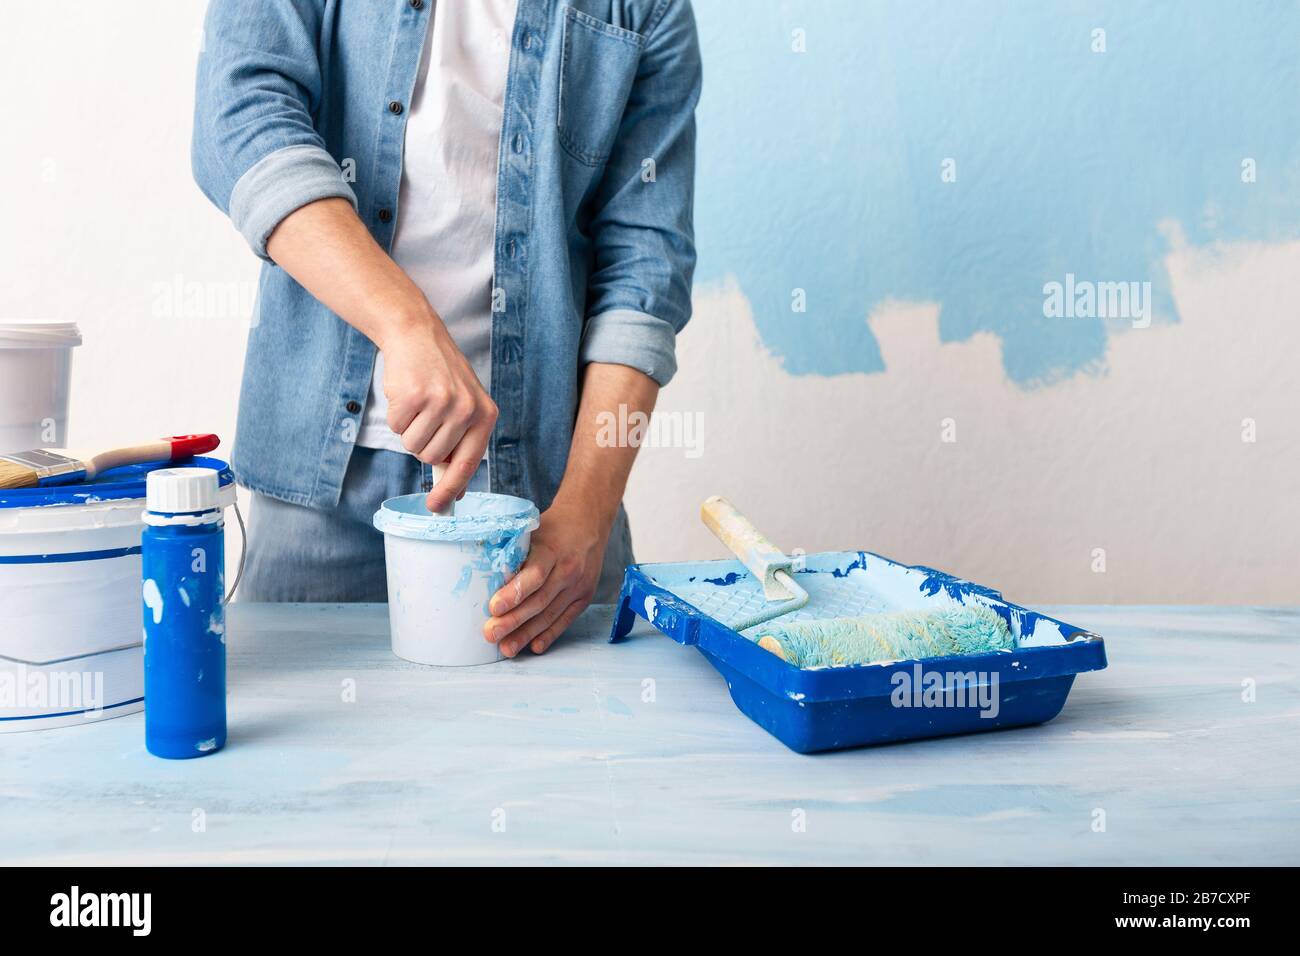 Man in jeans mixes paint in bucket Stock Photo